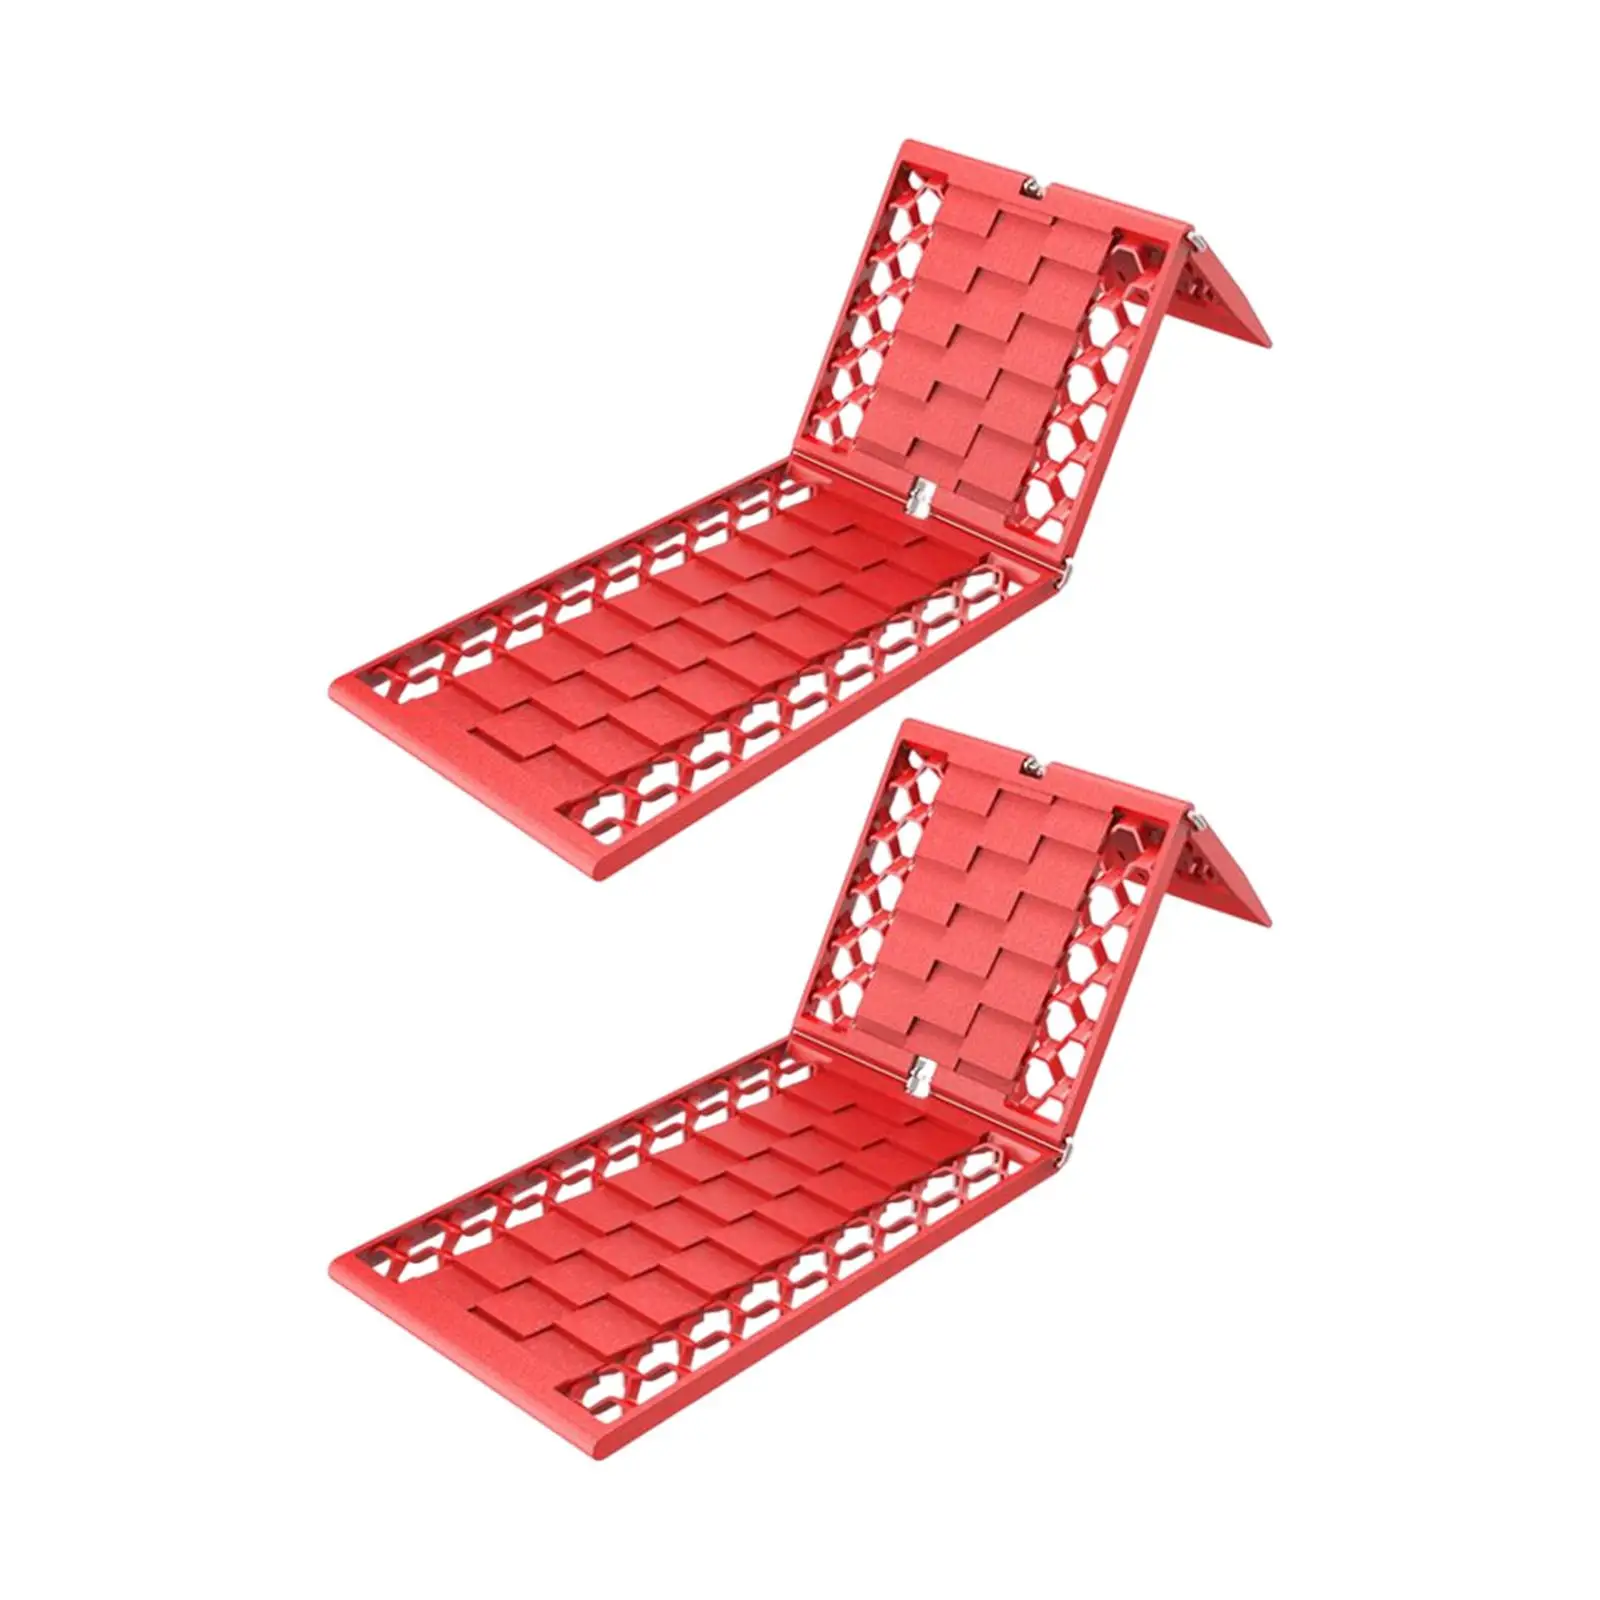 2Pcs Foldable Traction Boards Wheel Tire Ladder High Strength for Truck